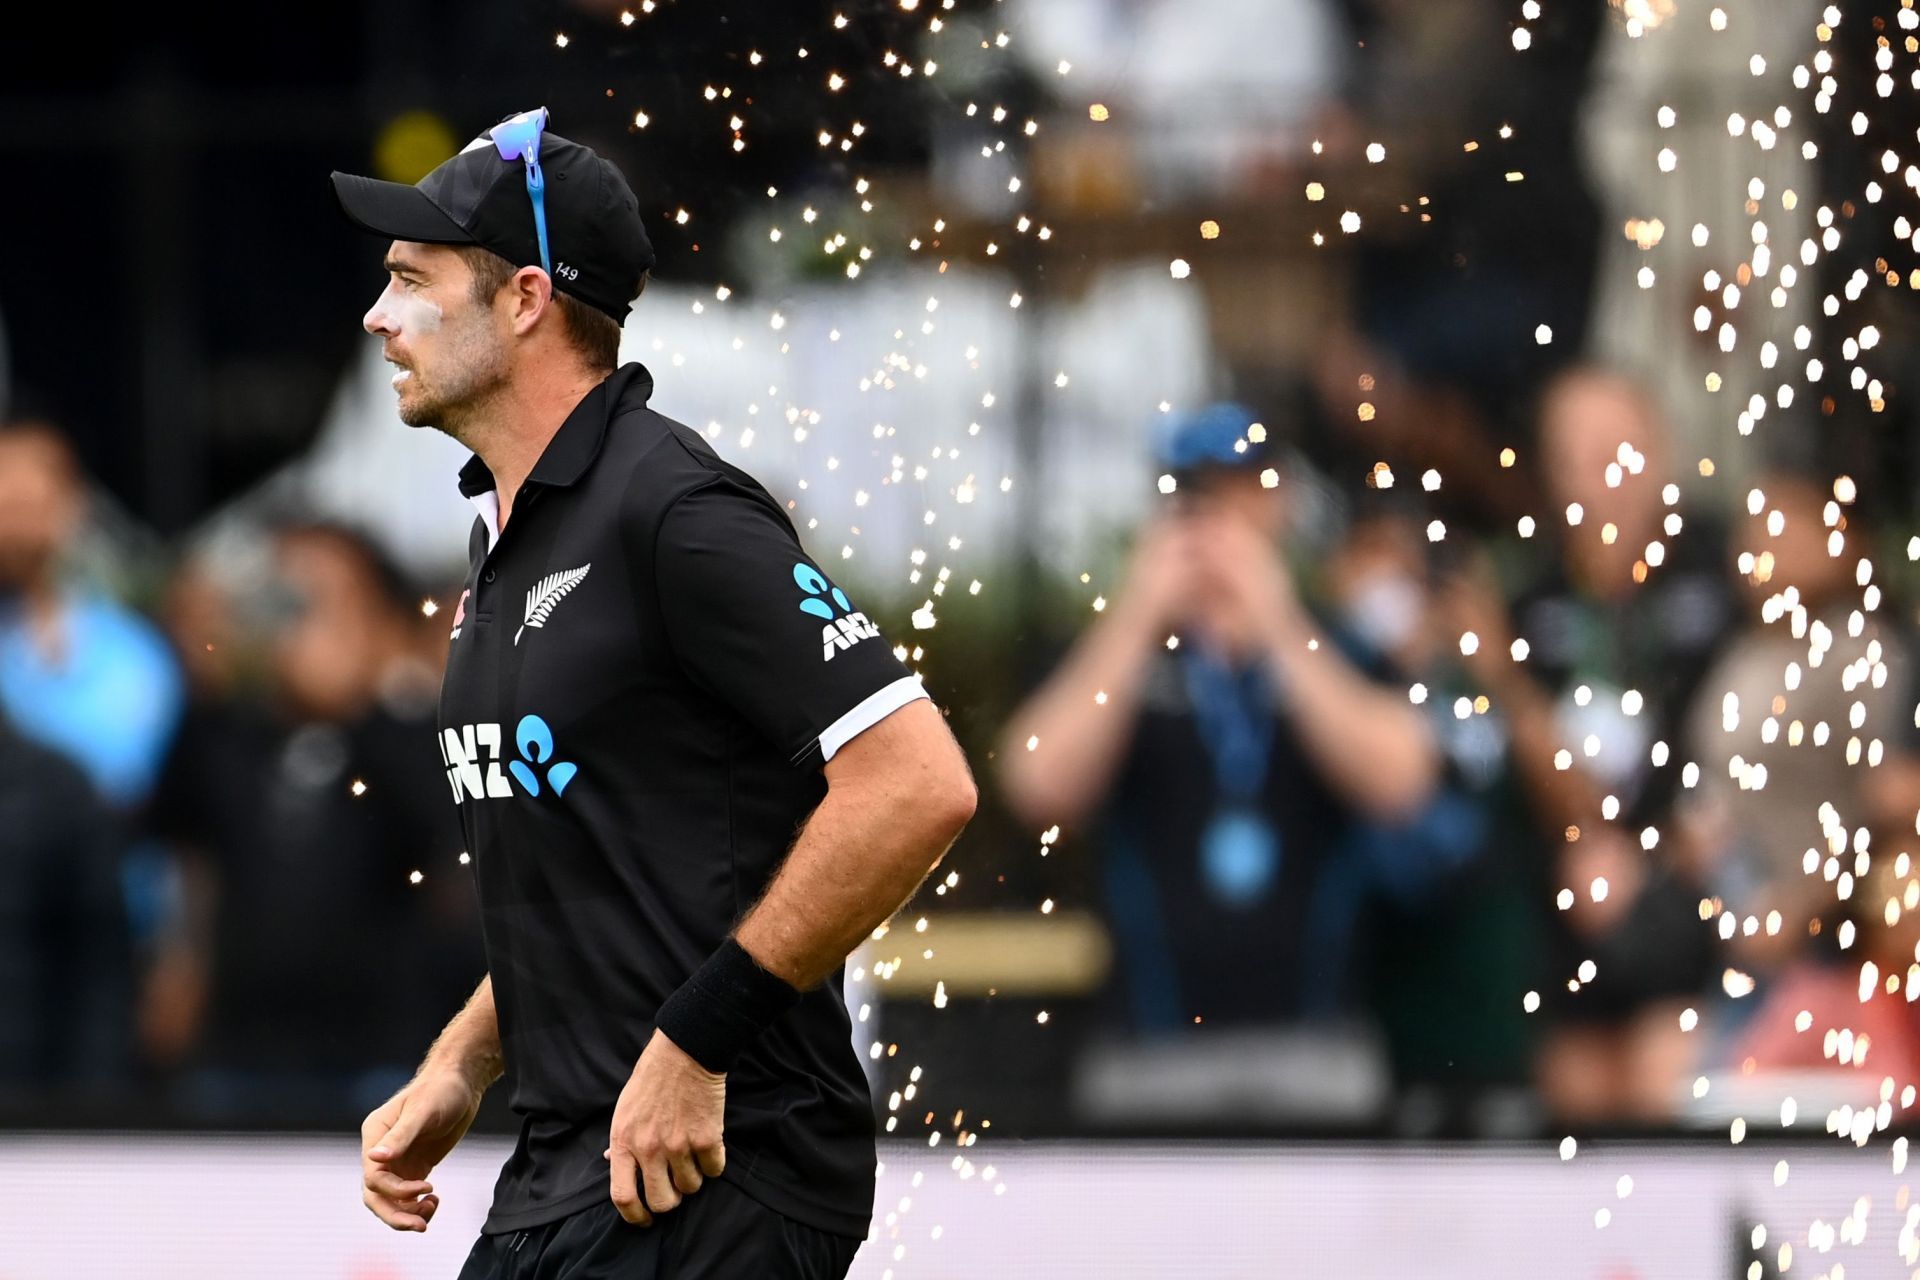 Tim Southee is the leader of the New Zealand bowling attack